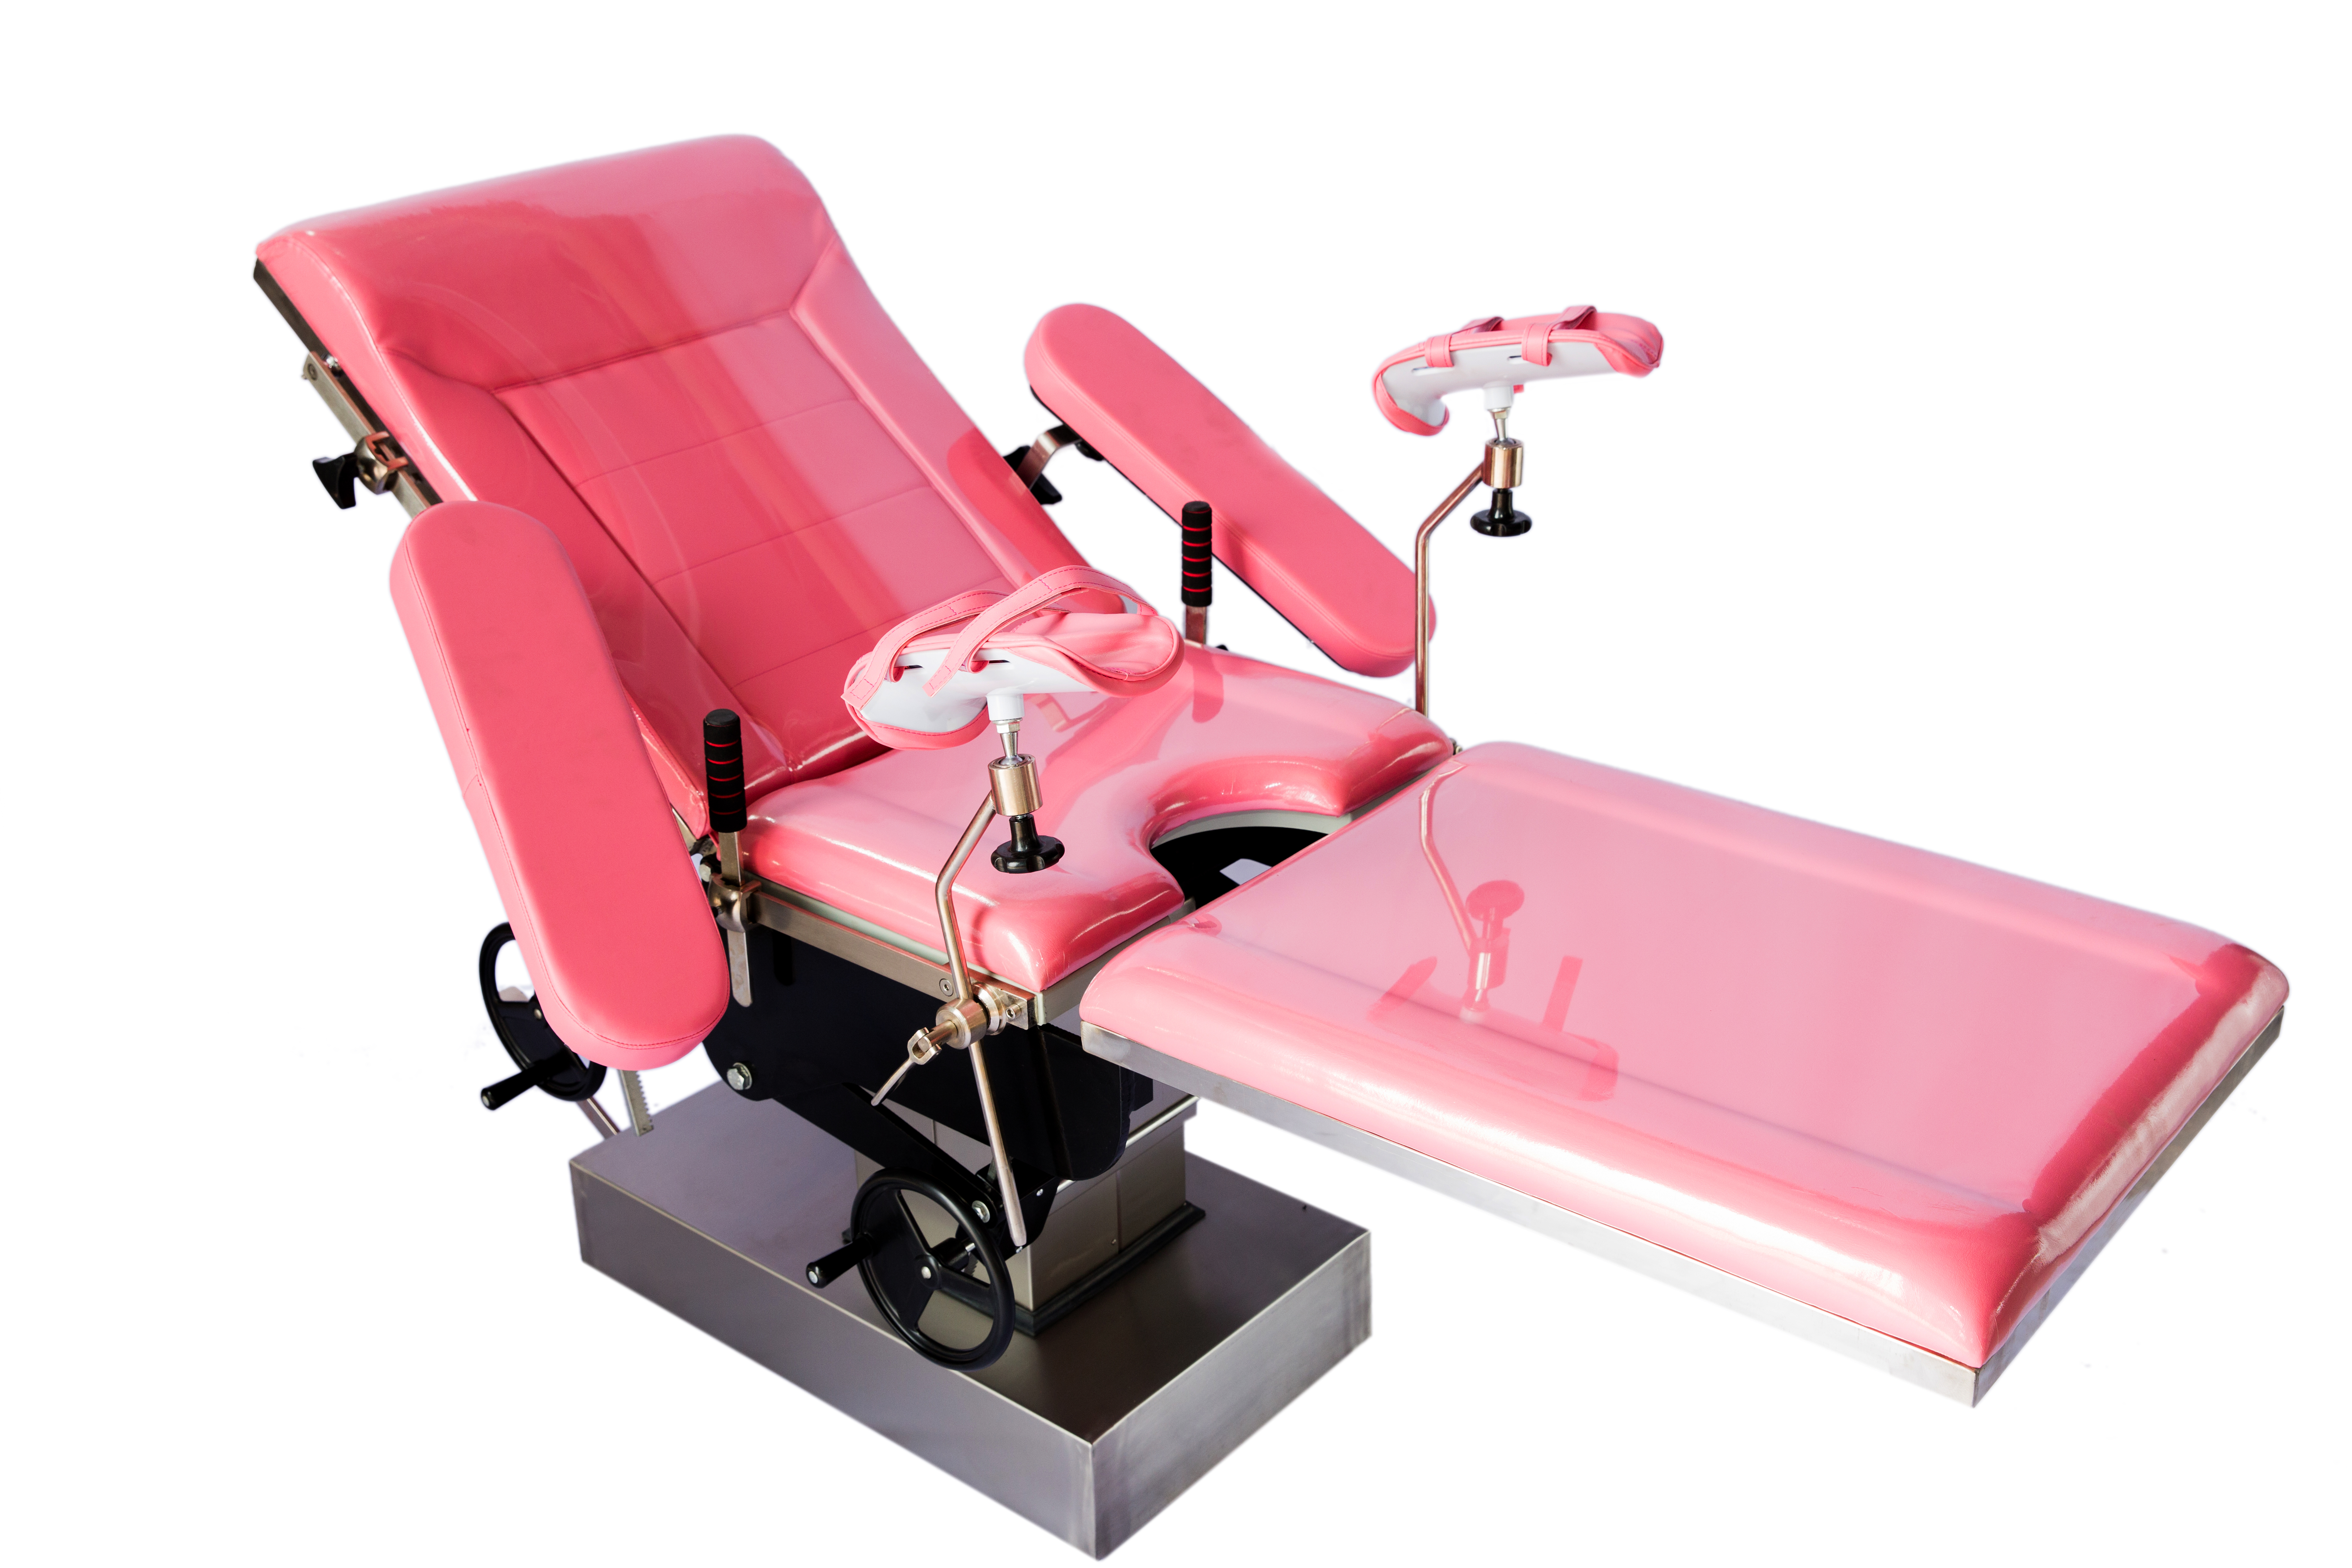 Hydraulic manual gynecological and obstetric table